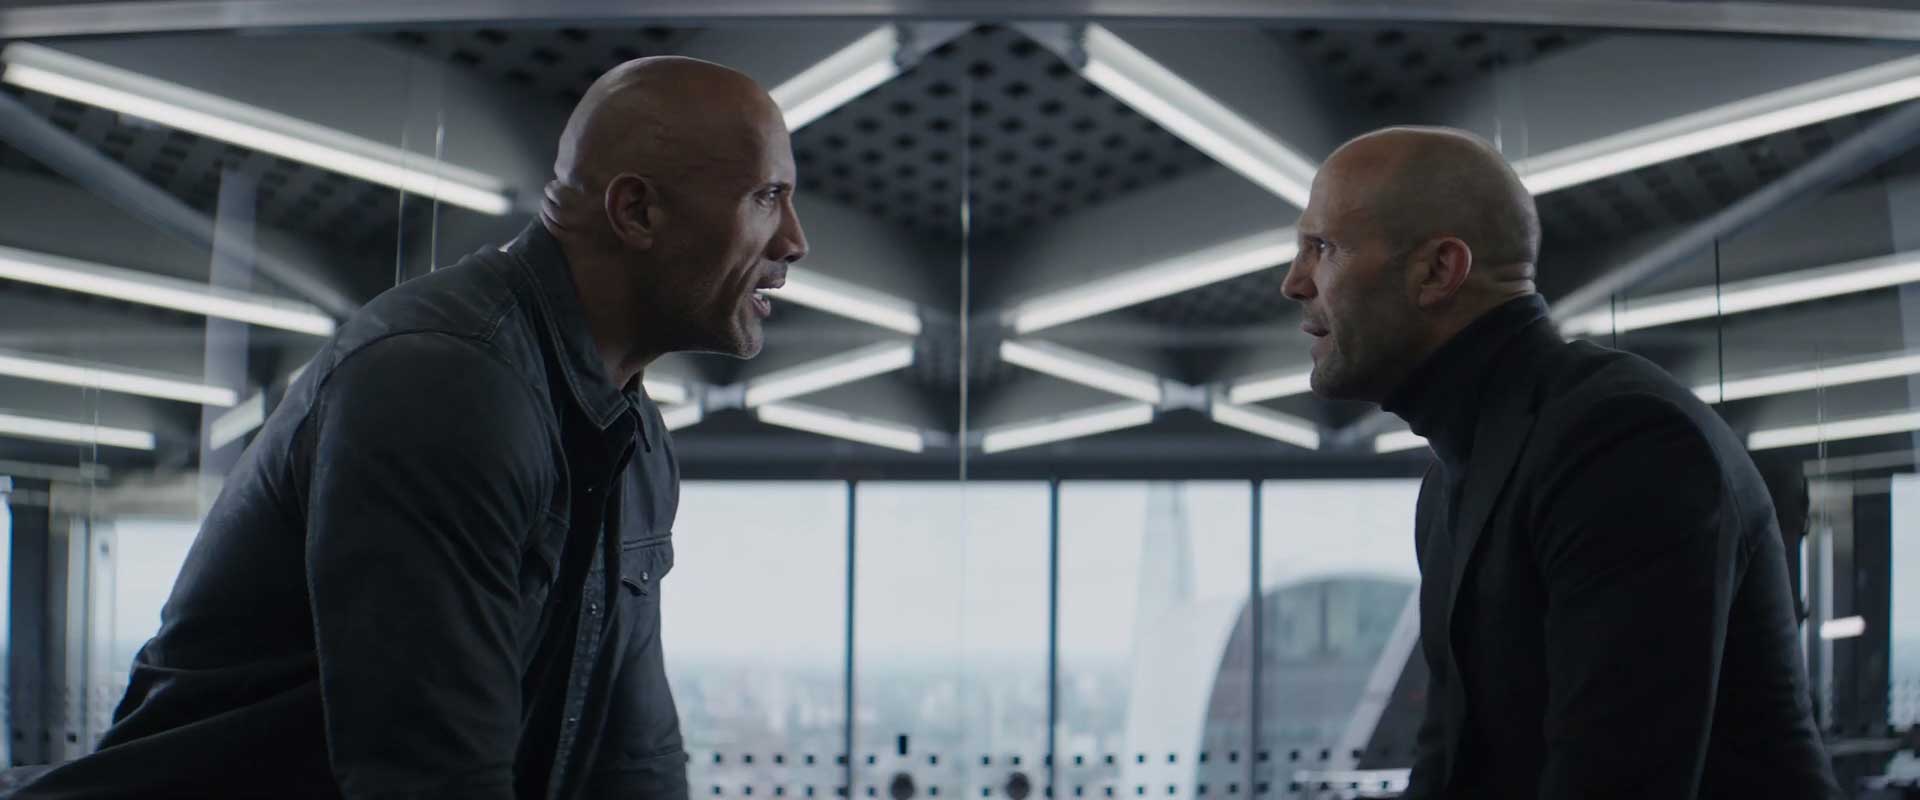 Fast and Furious Hobbs and Shaw Trailer